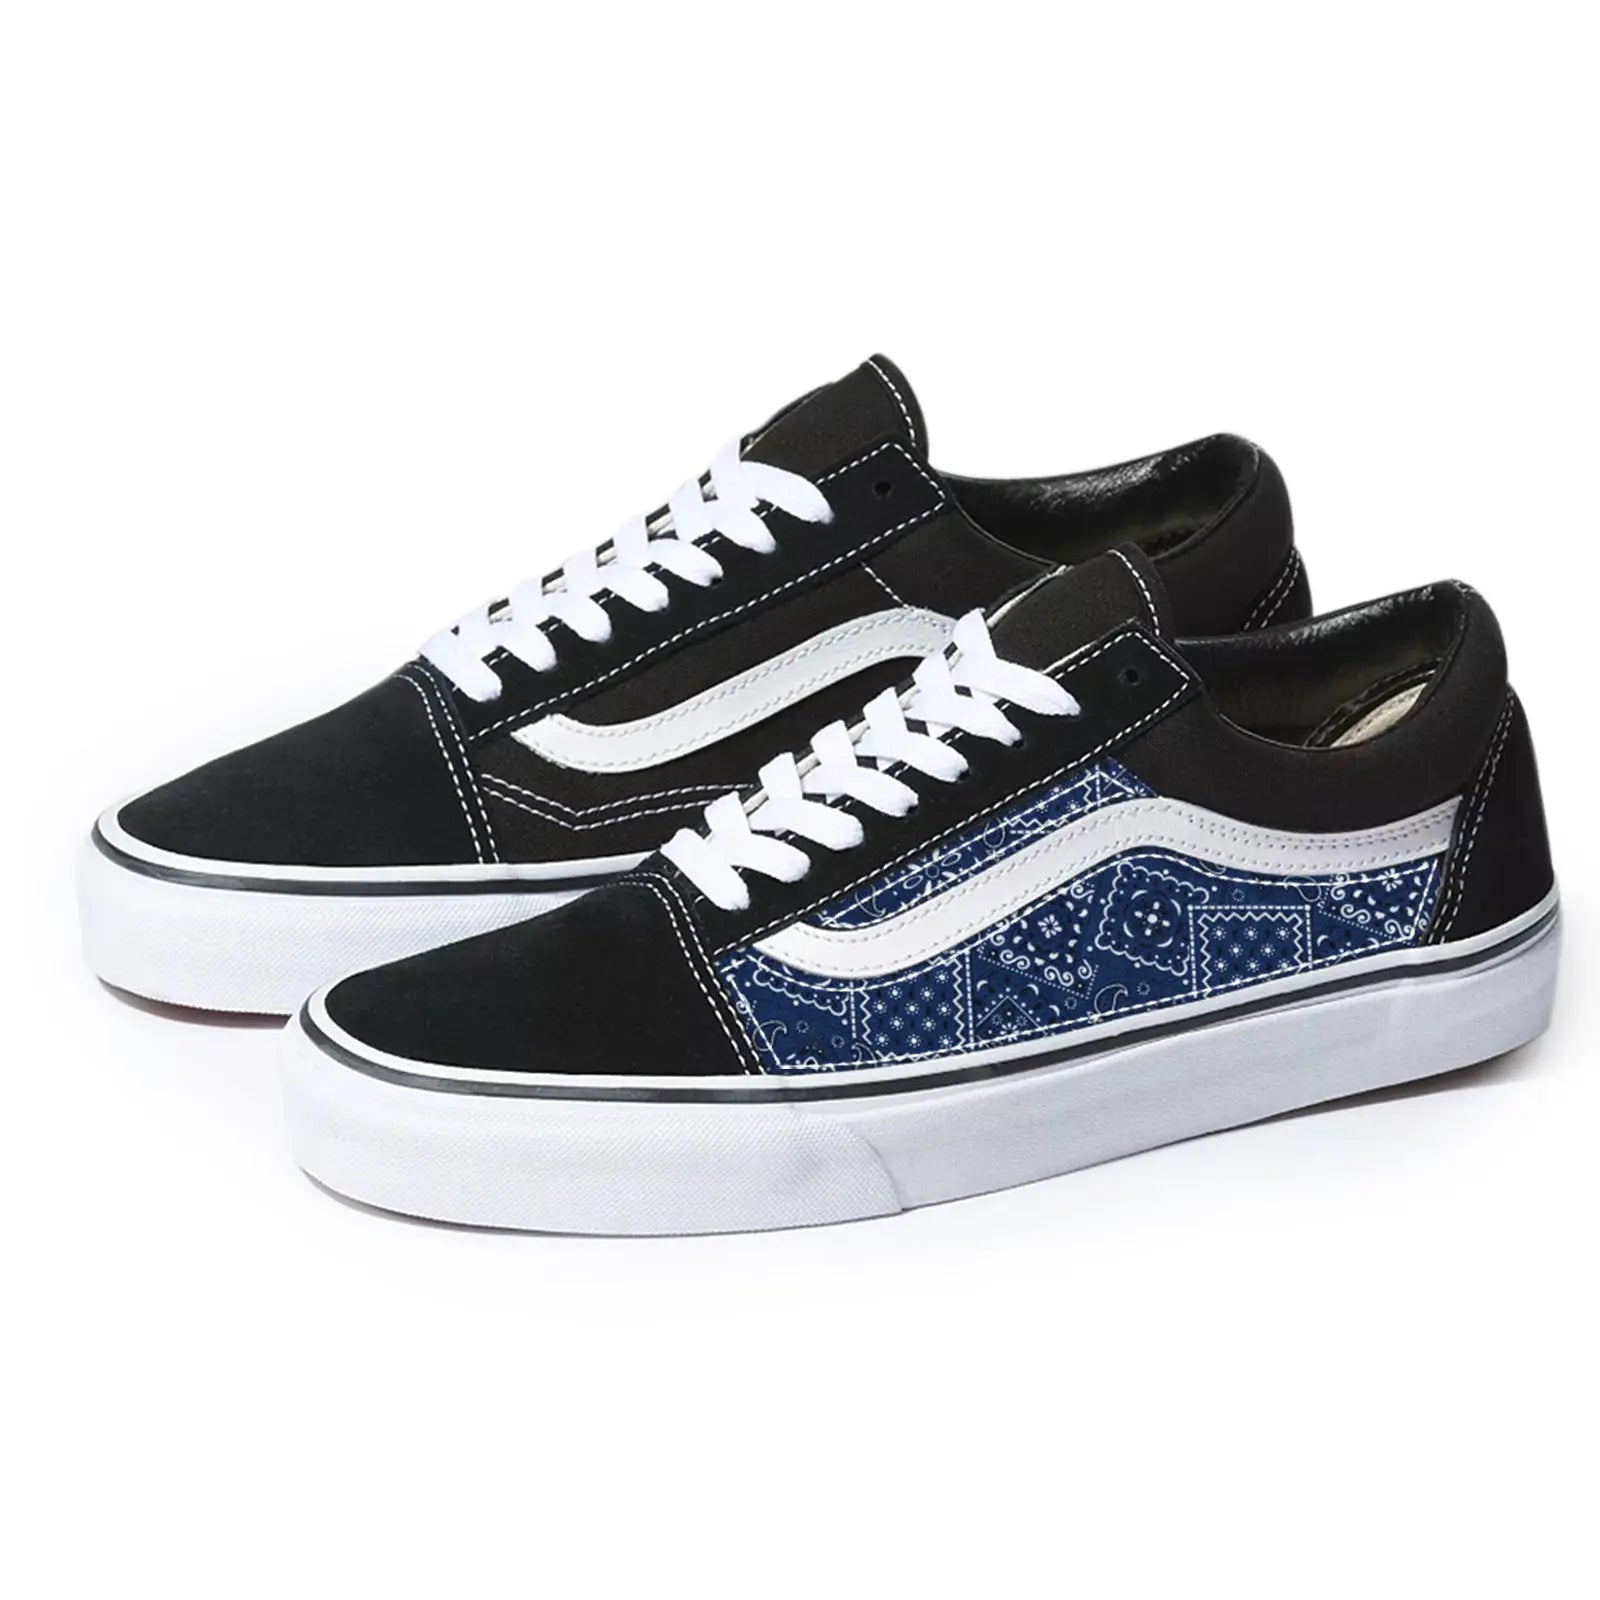 Vans Black Old Skool x Blue Handmade Shoes By Collection